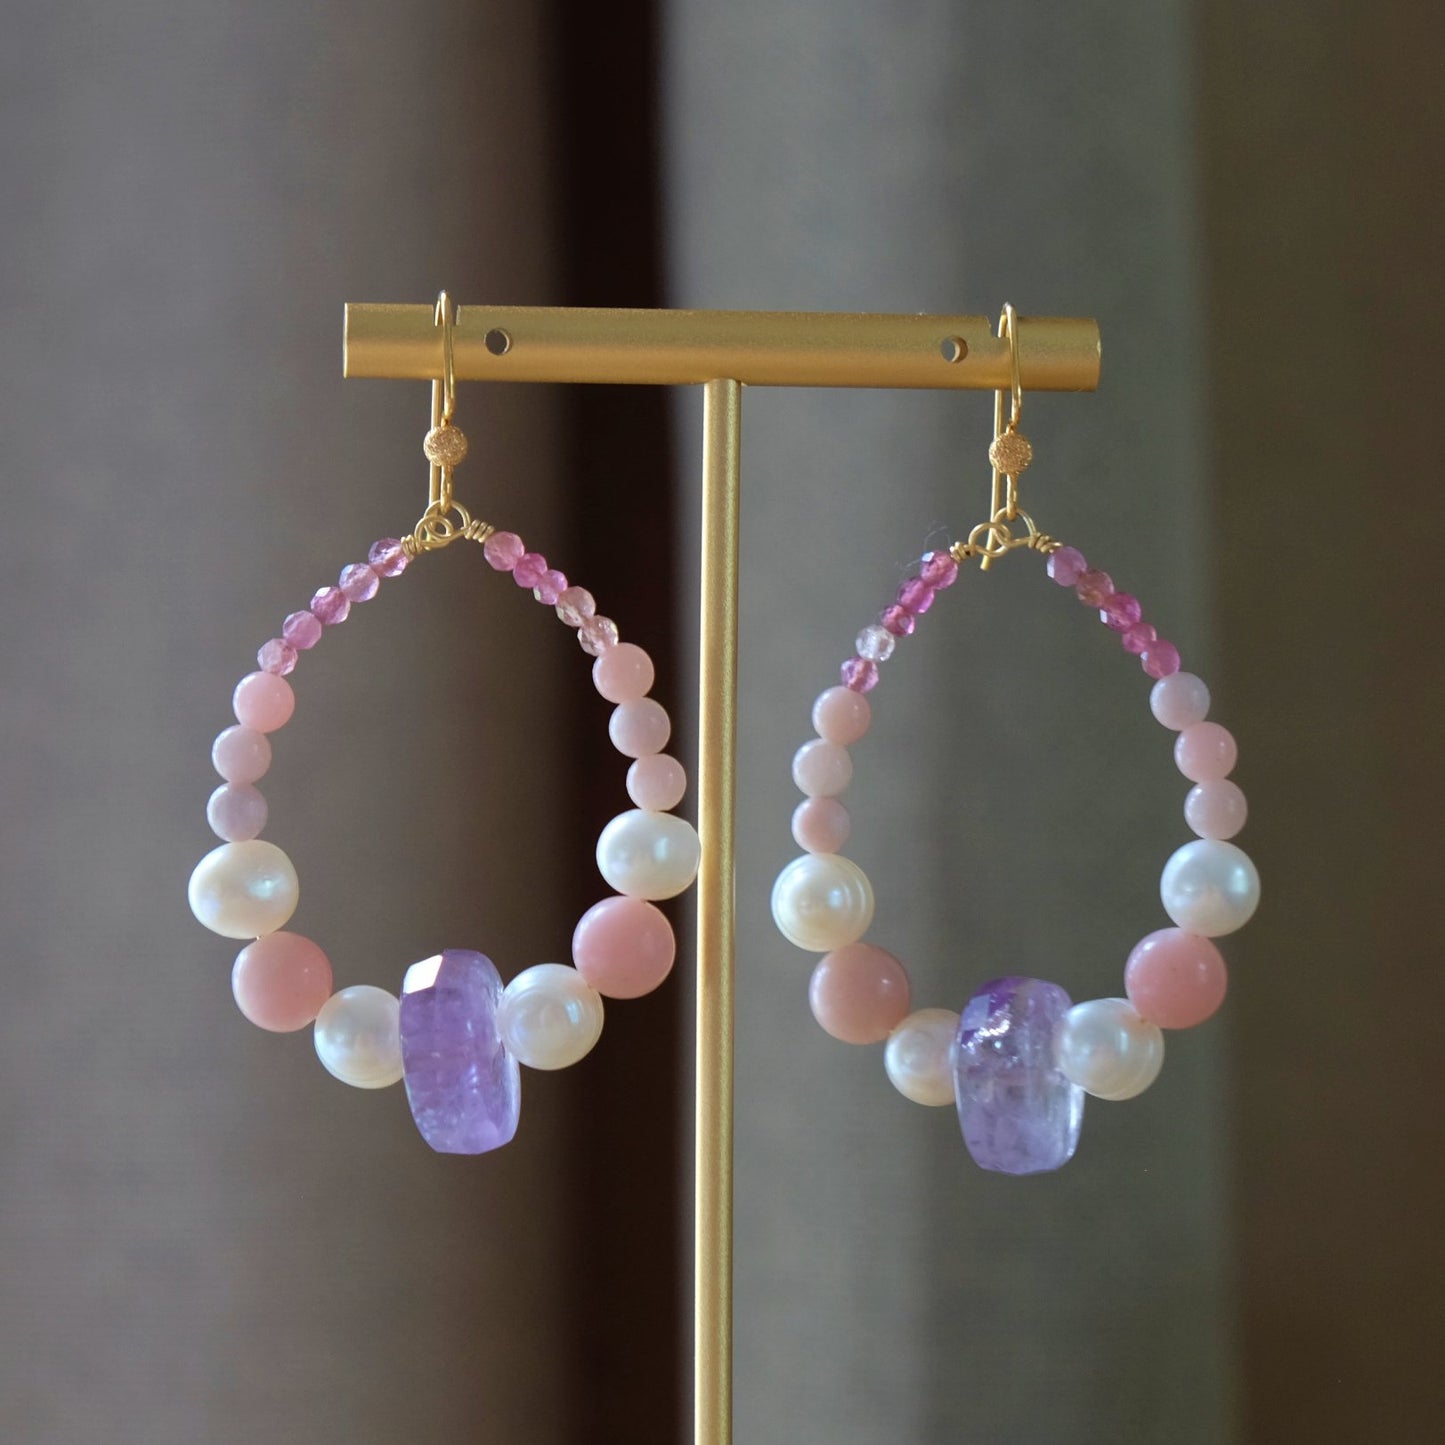 Pink Blush Earrings with Pearls and Amethyst